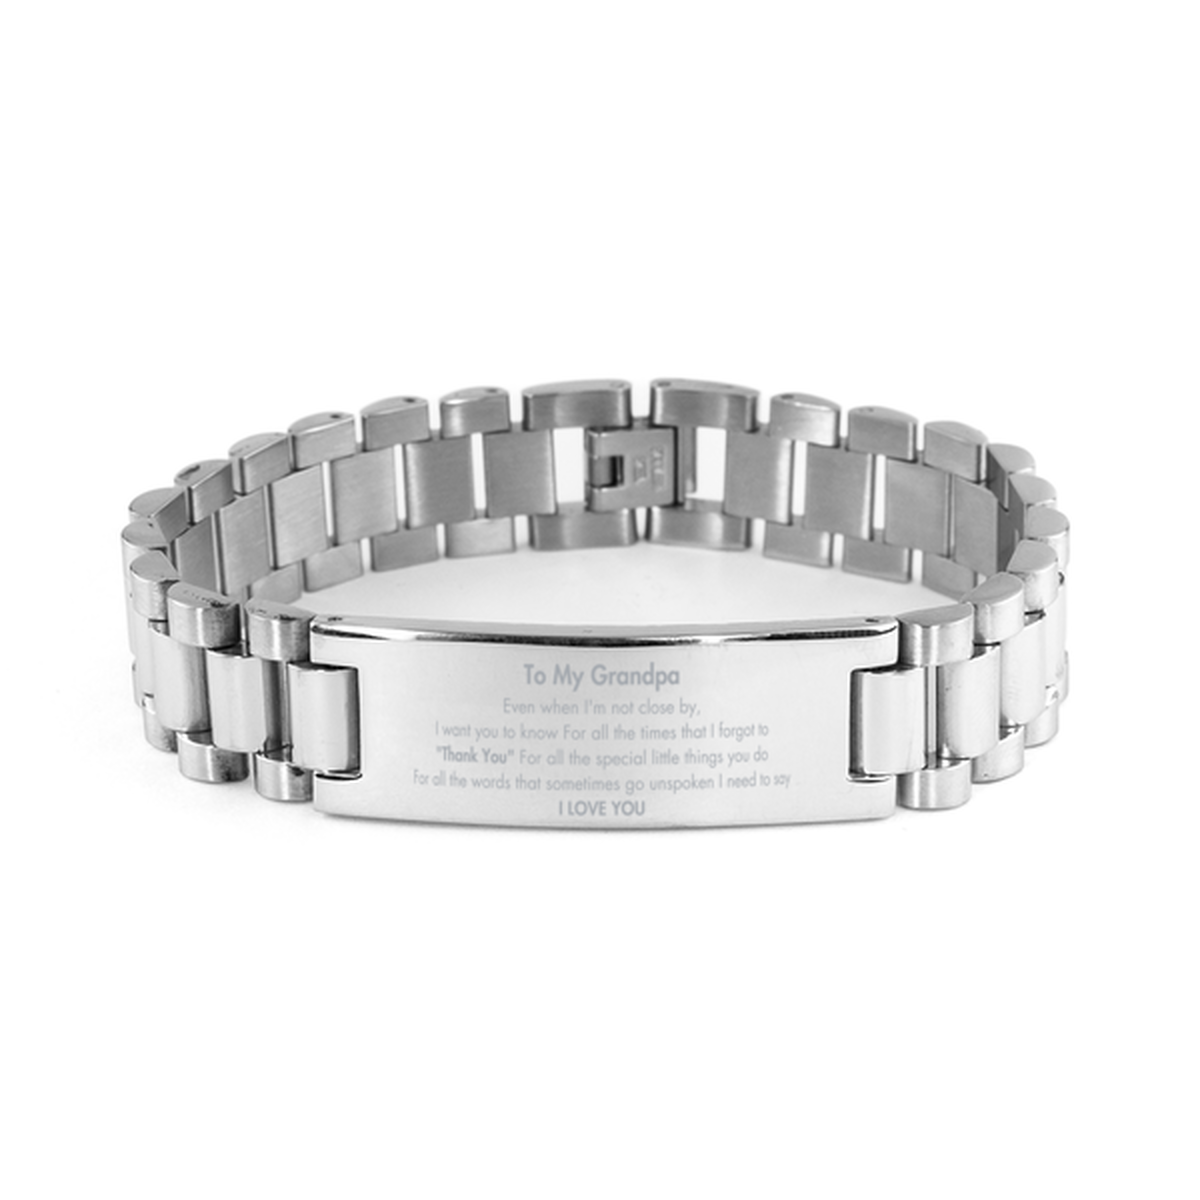 Thank You Gifts for Grandpa, Keepsake Ladder Stainless Steel Bracelet Gifts for Grandpa Birthday Mother's day Father's Day Grandpa For all the words That sometimes go unspoken I need to say I LOVE YOU